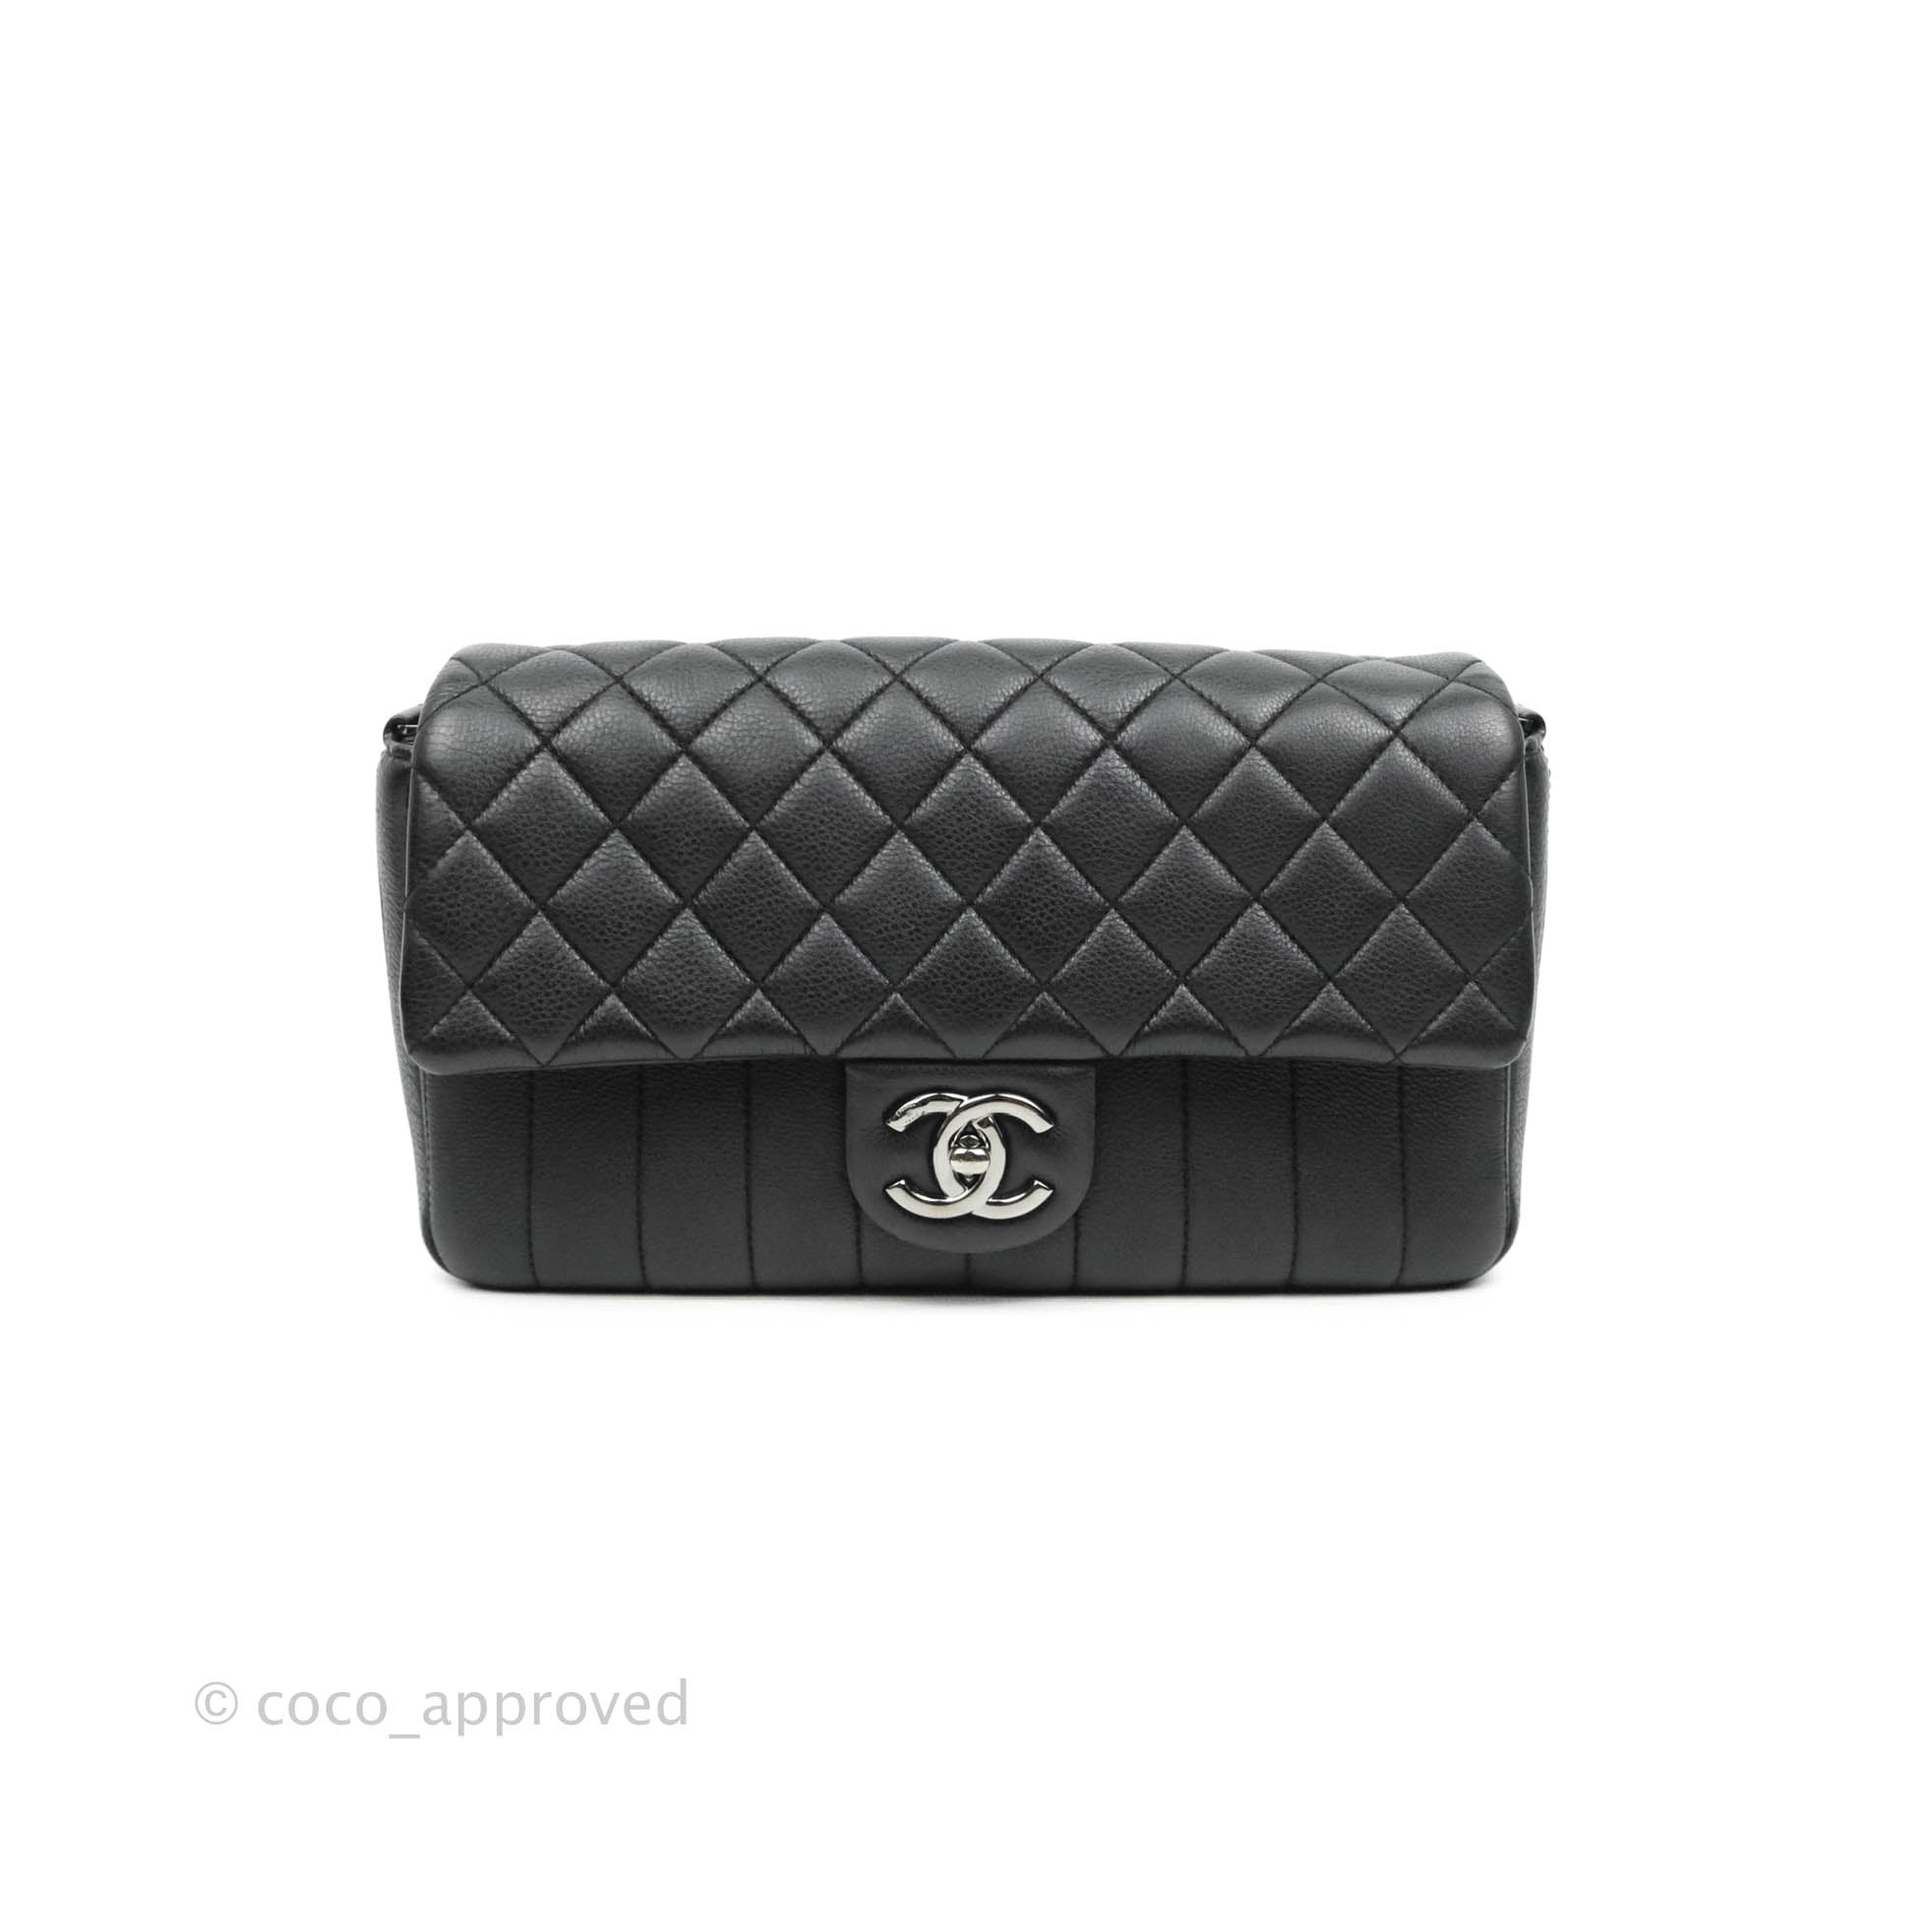 Chanel Black Chevron Quilted Lambskin Leather New Clutch Flap Bag